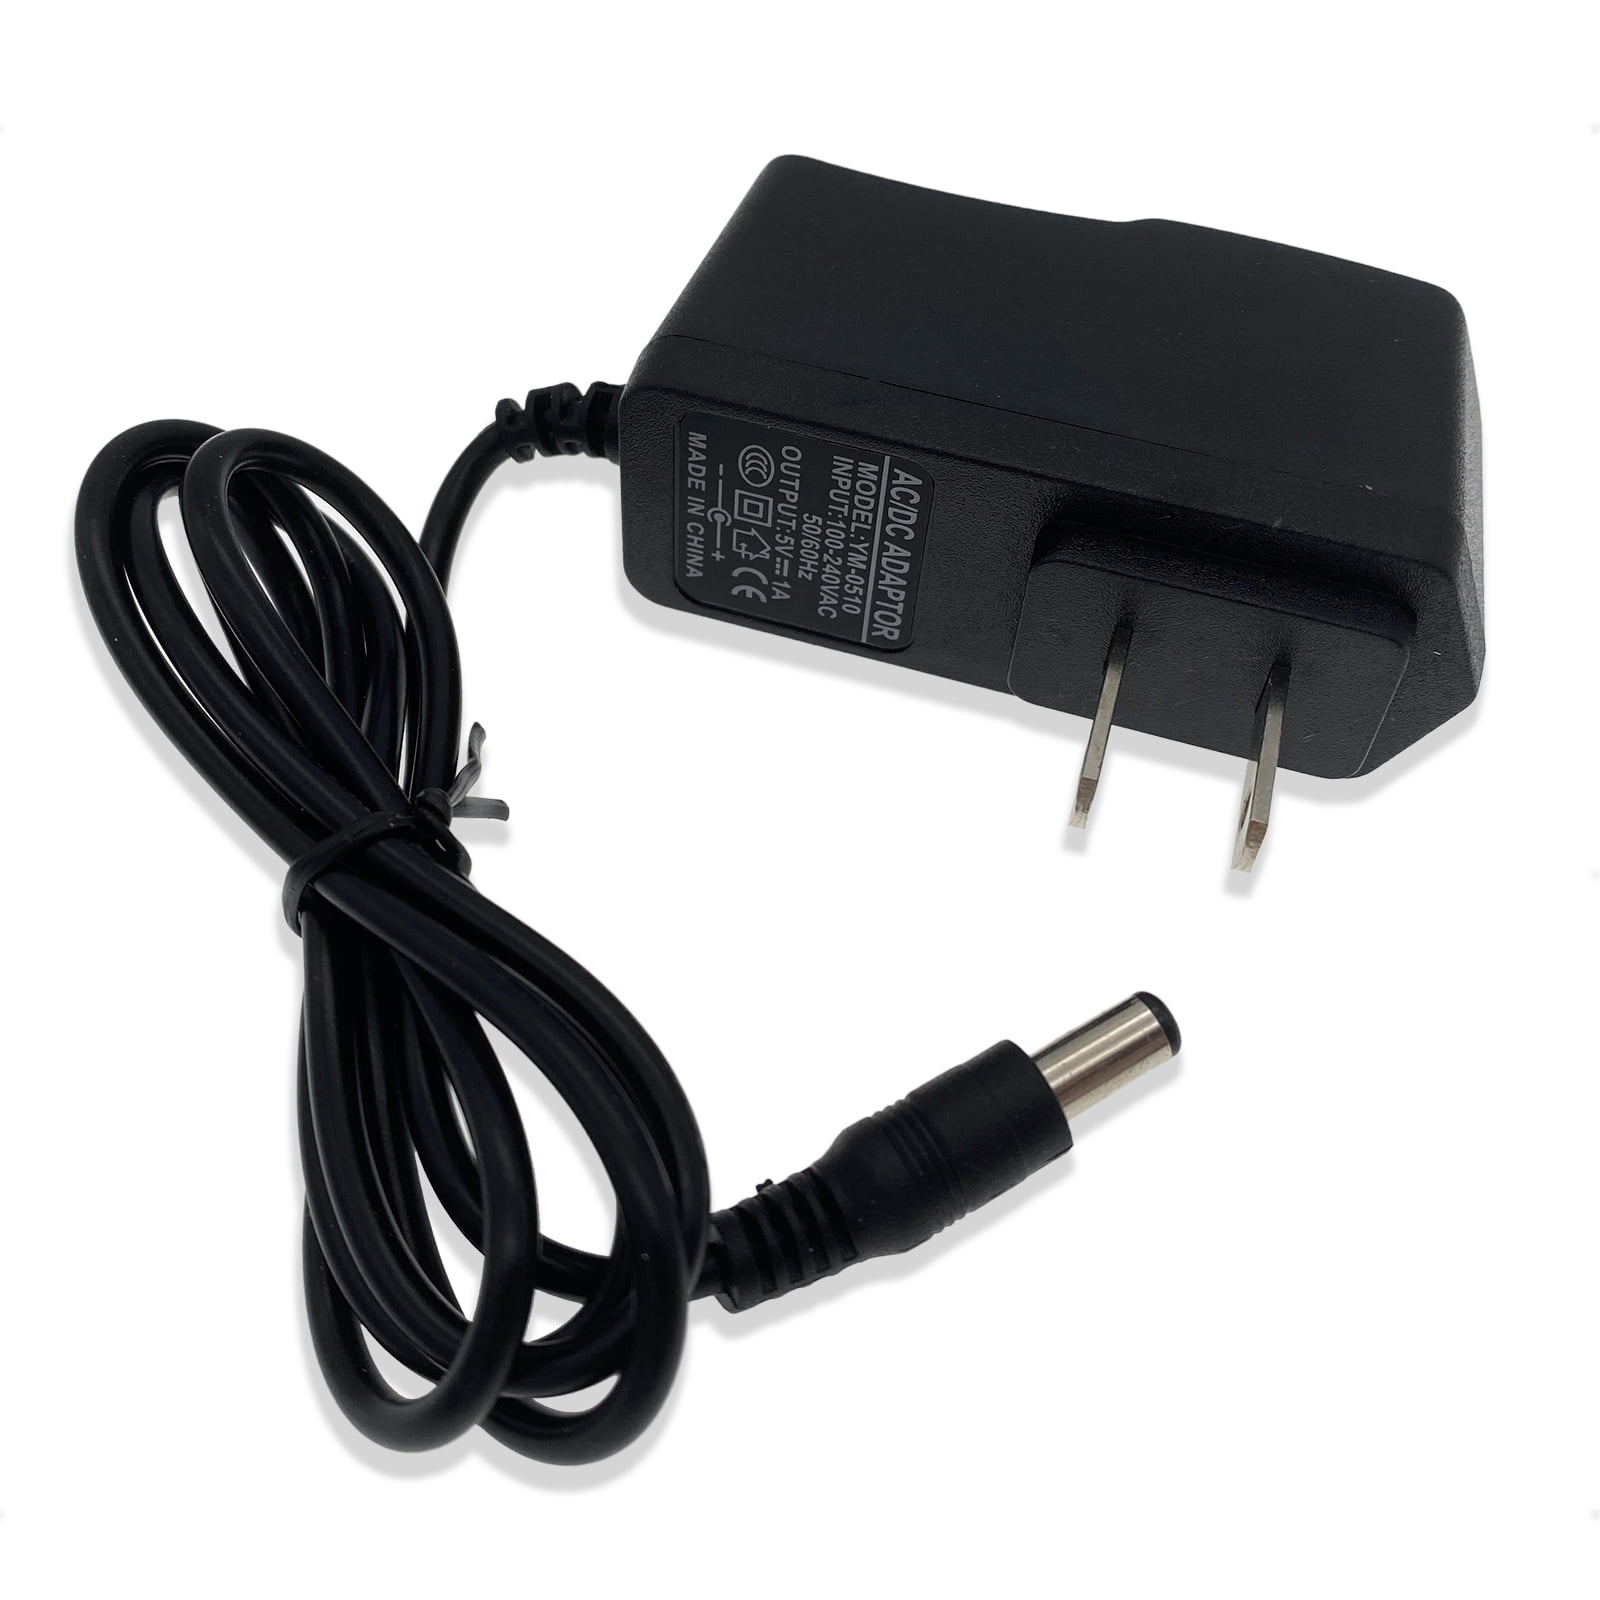 AC100-240V to DC 5V 1A 5.5mm * 2.1mm Wall Charger Adapter